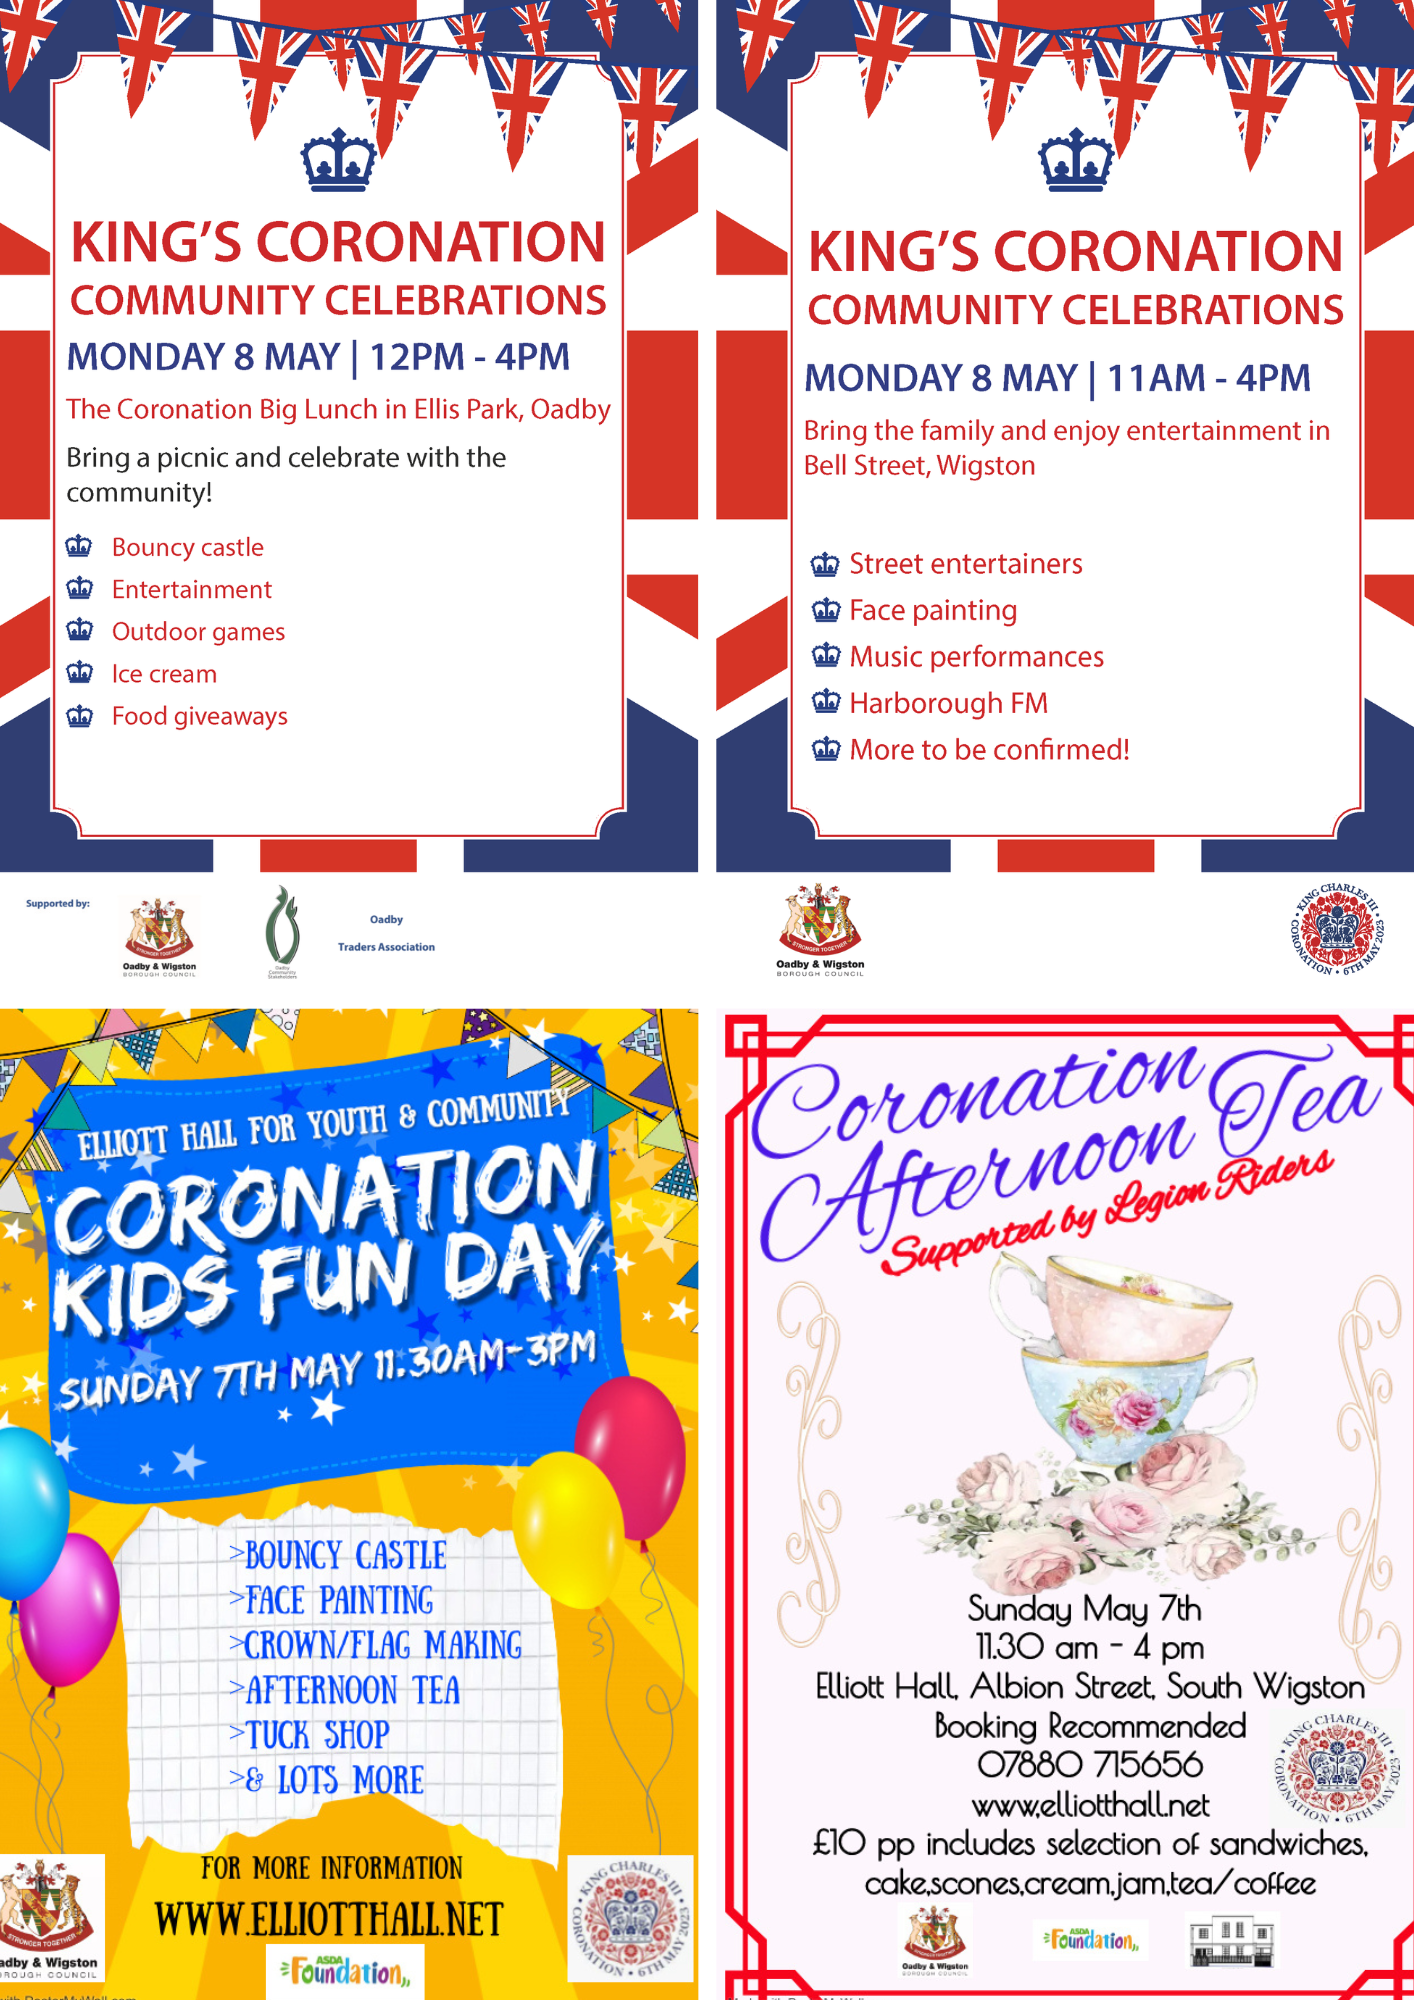 Events taking place in Oadby & Wigston for the coronation of King Charles III posters.